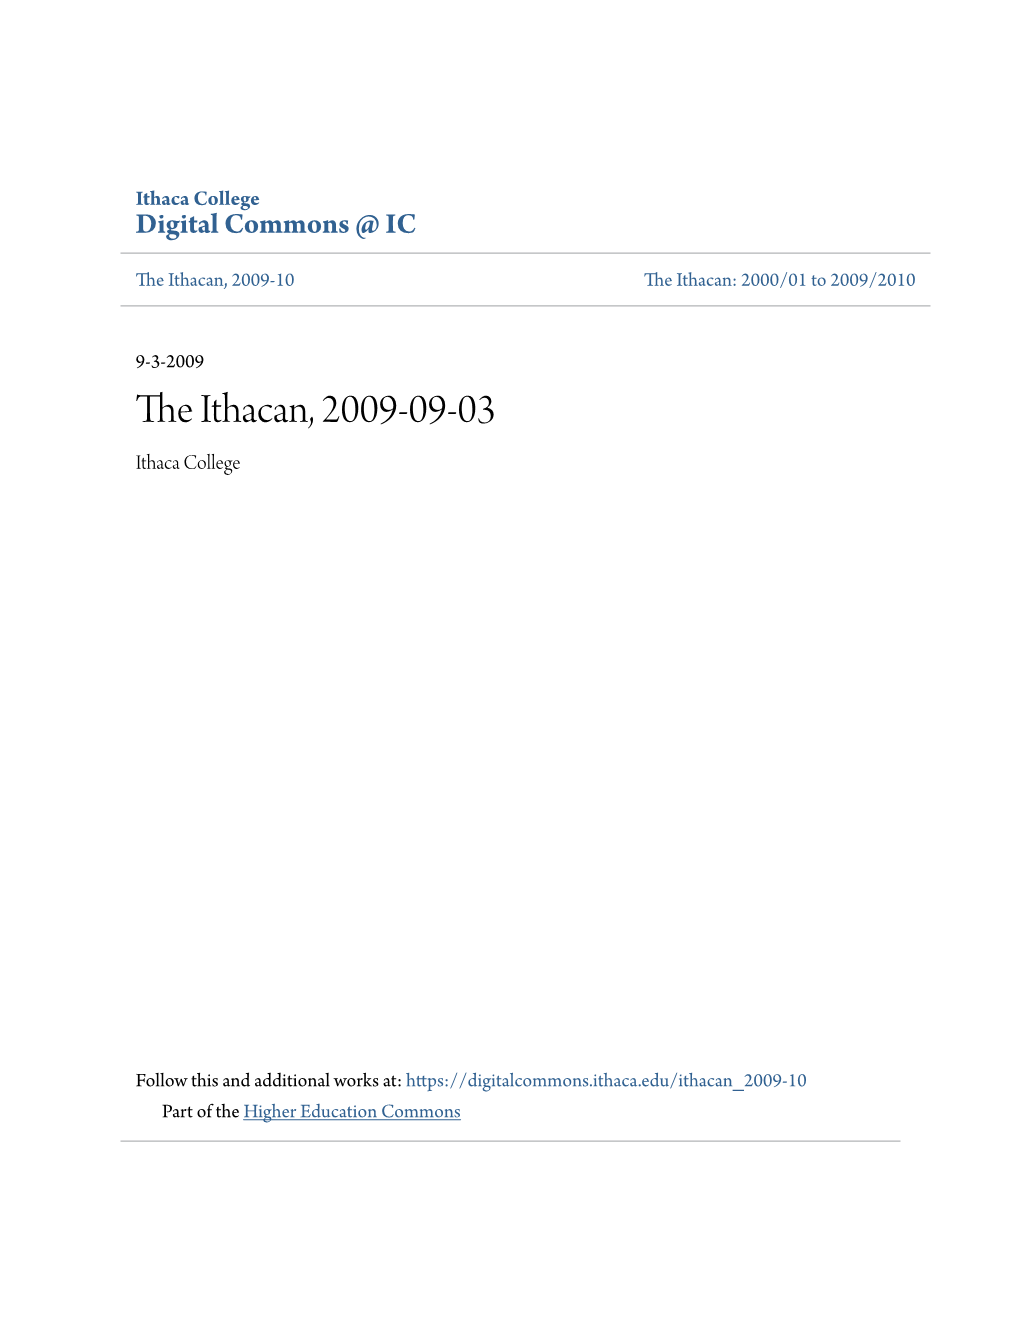 The Ithacan, 2009-09-03